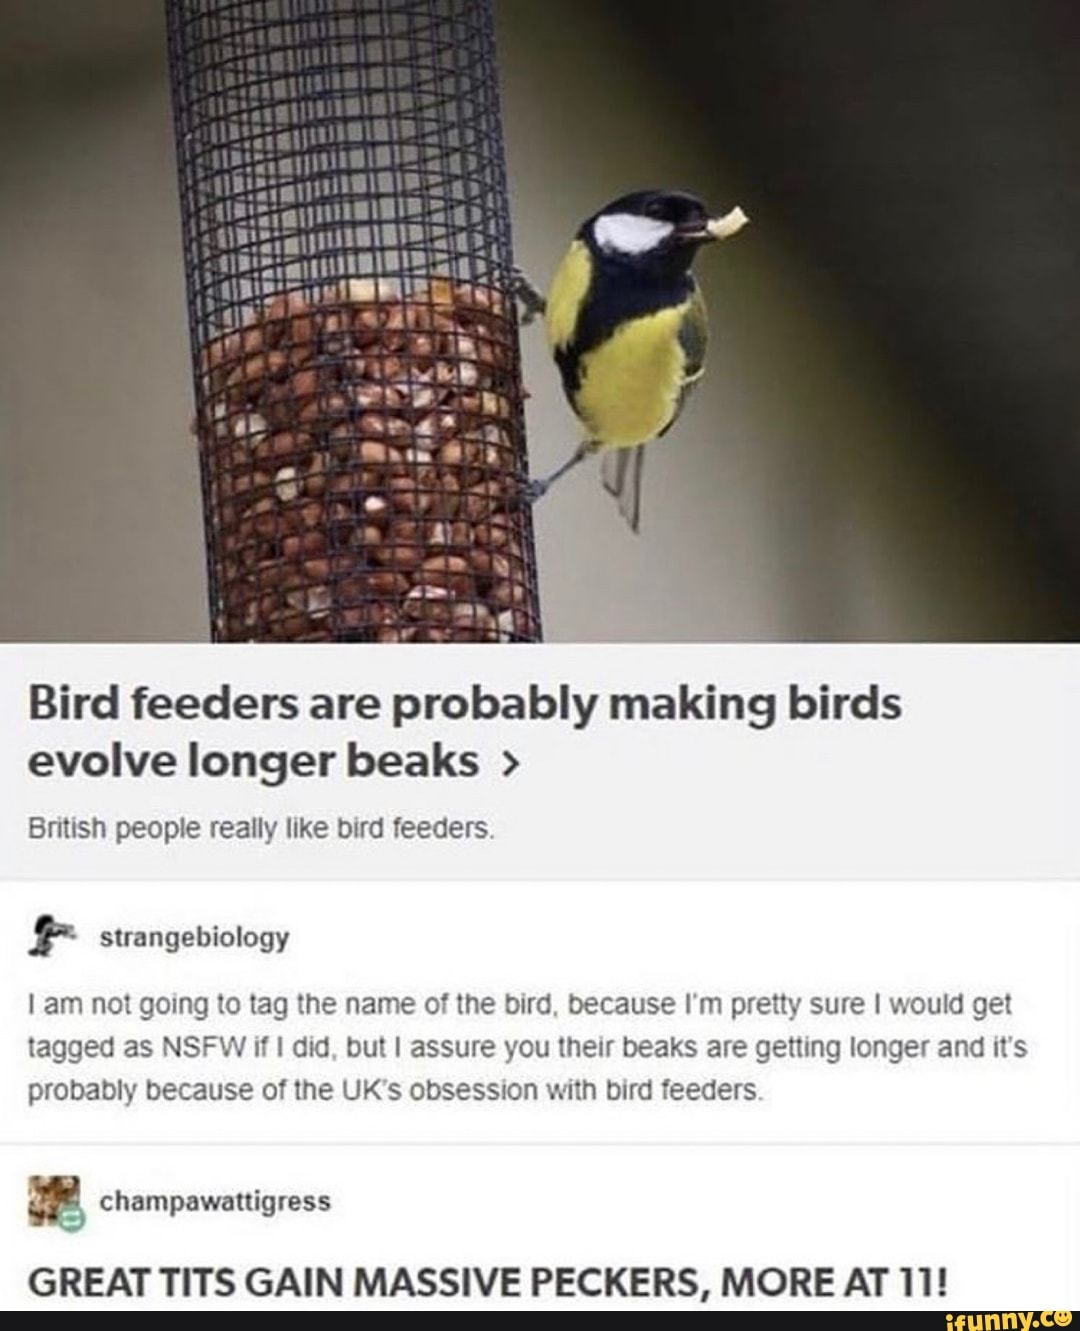 How did the ground tit get its long beak